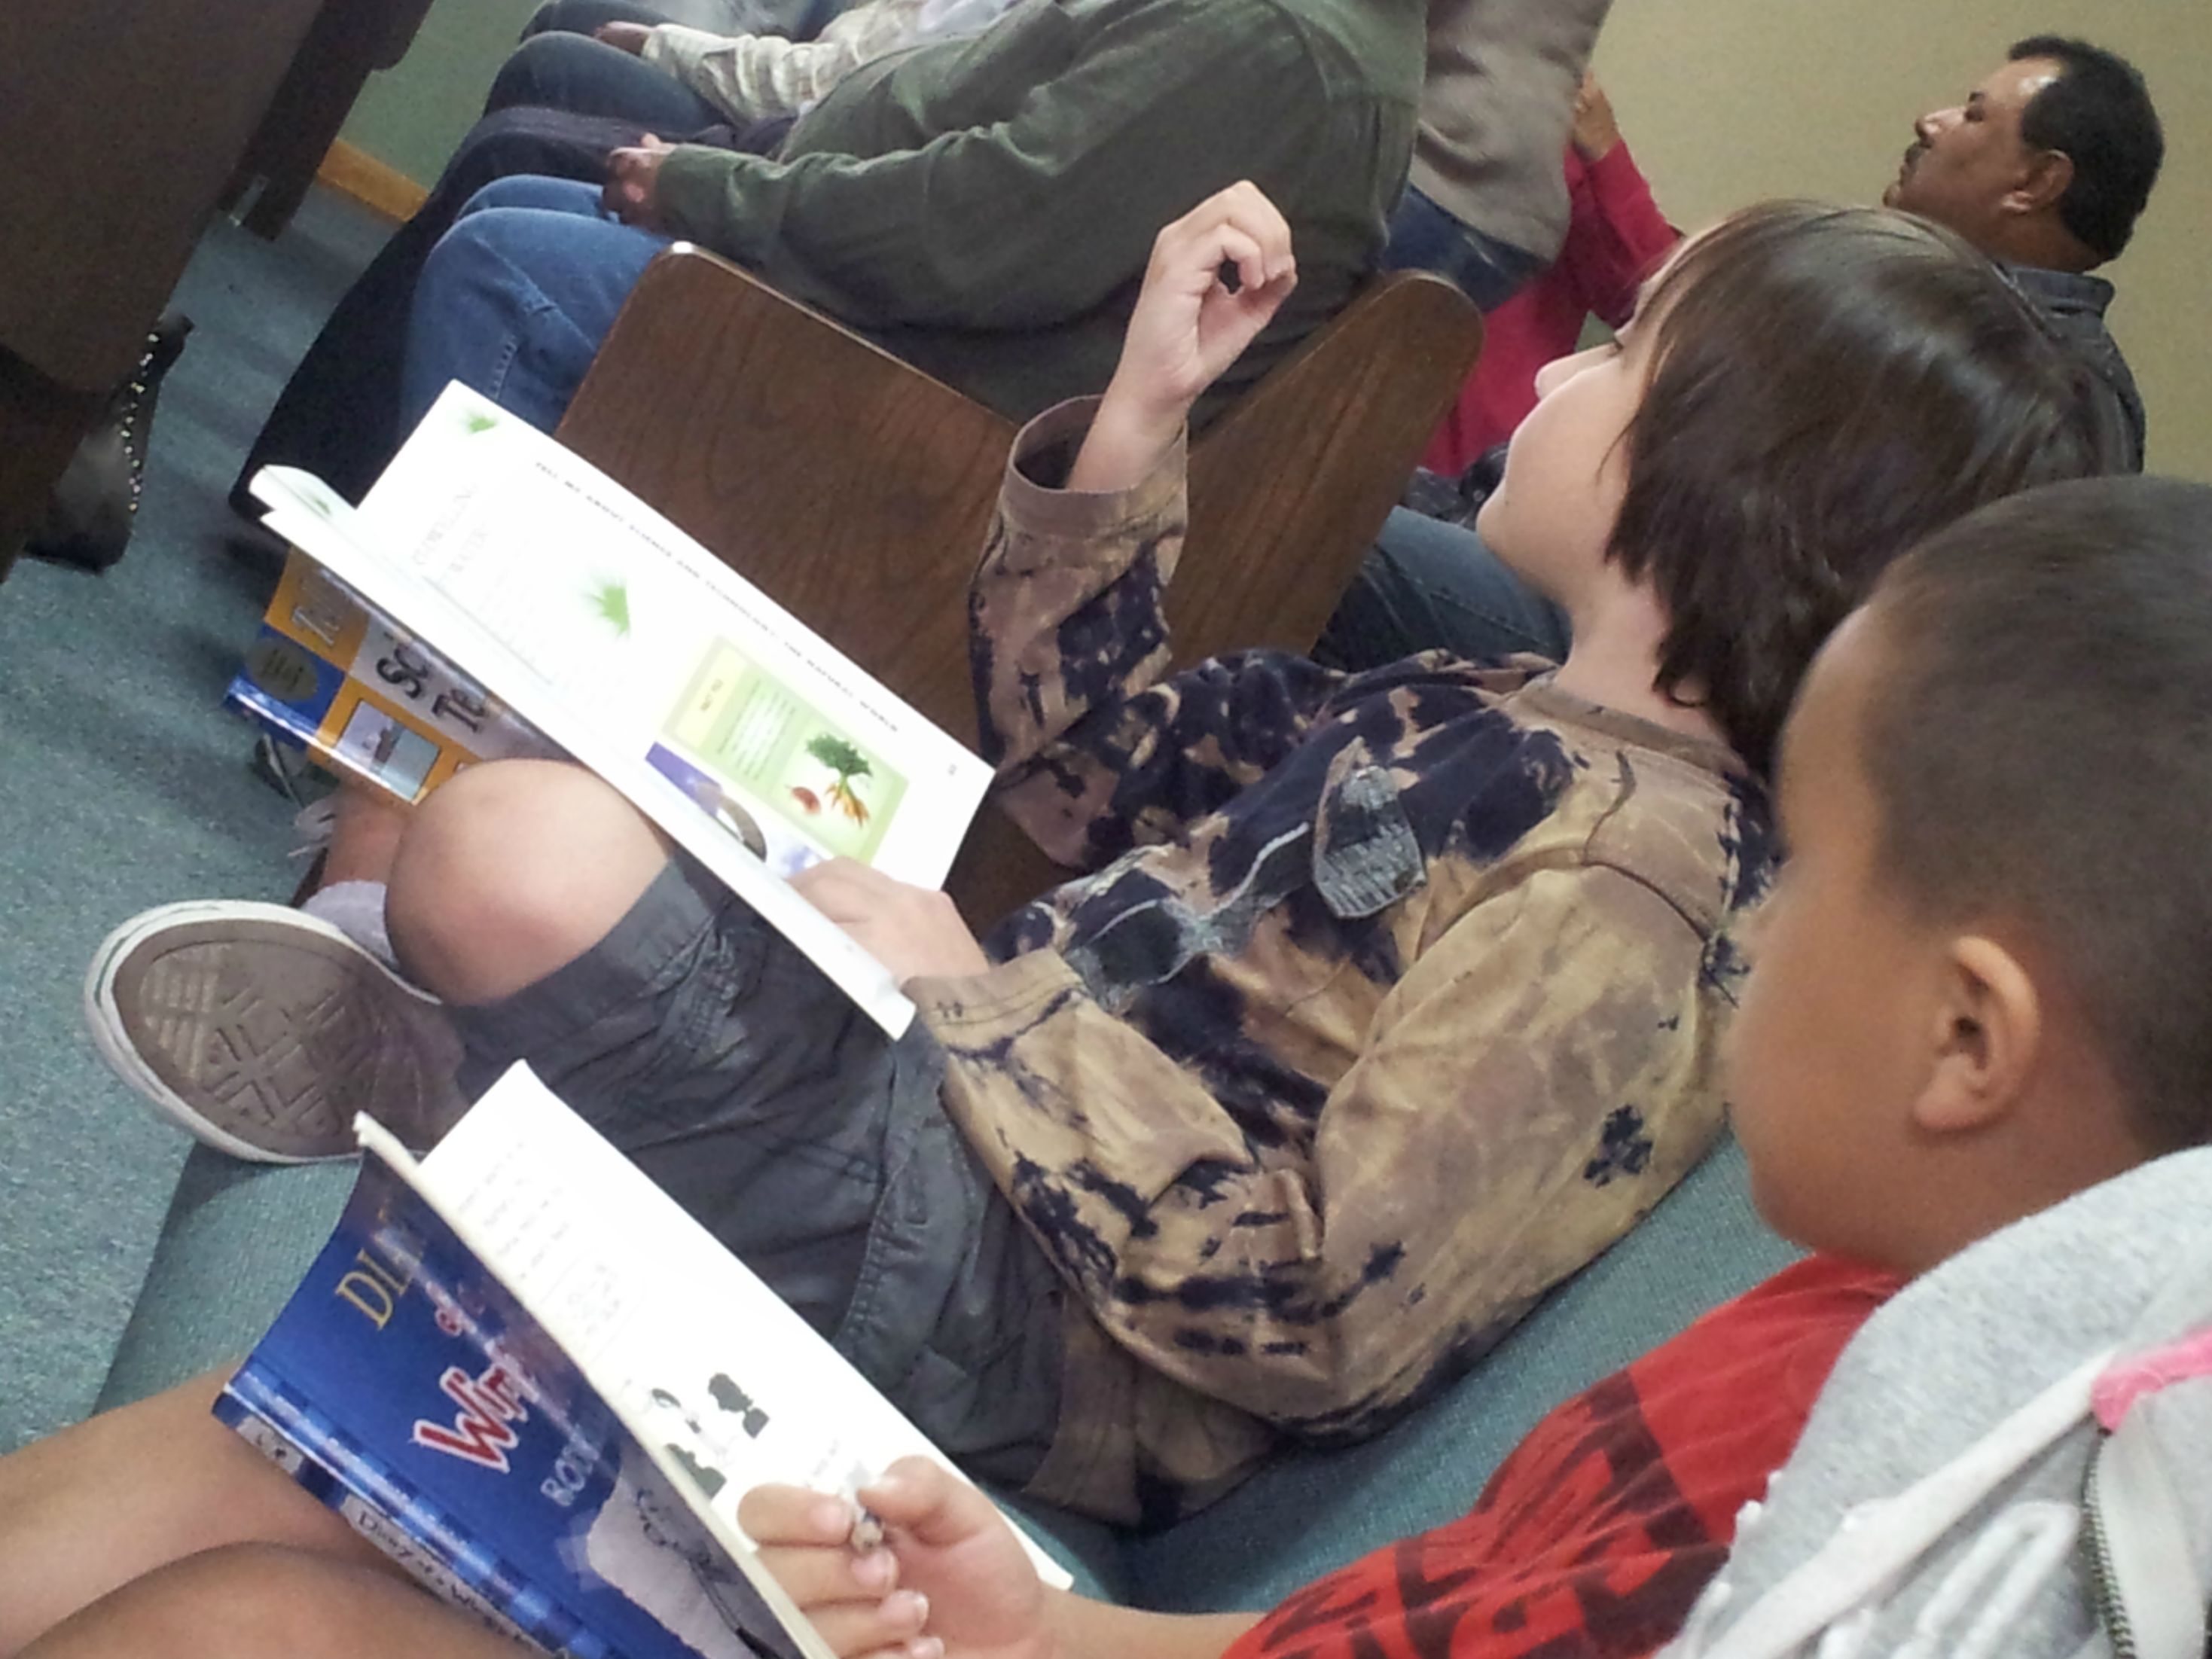 The kid who is obviously bored in church just happens to be reading a Science and Technology textbook.